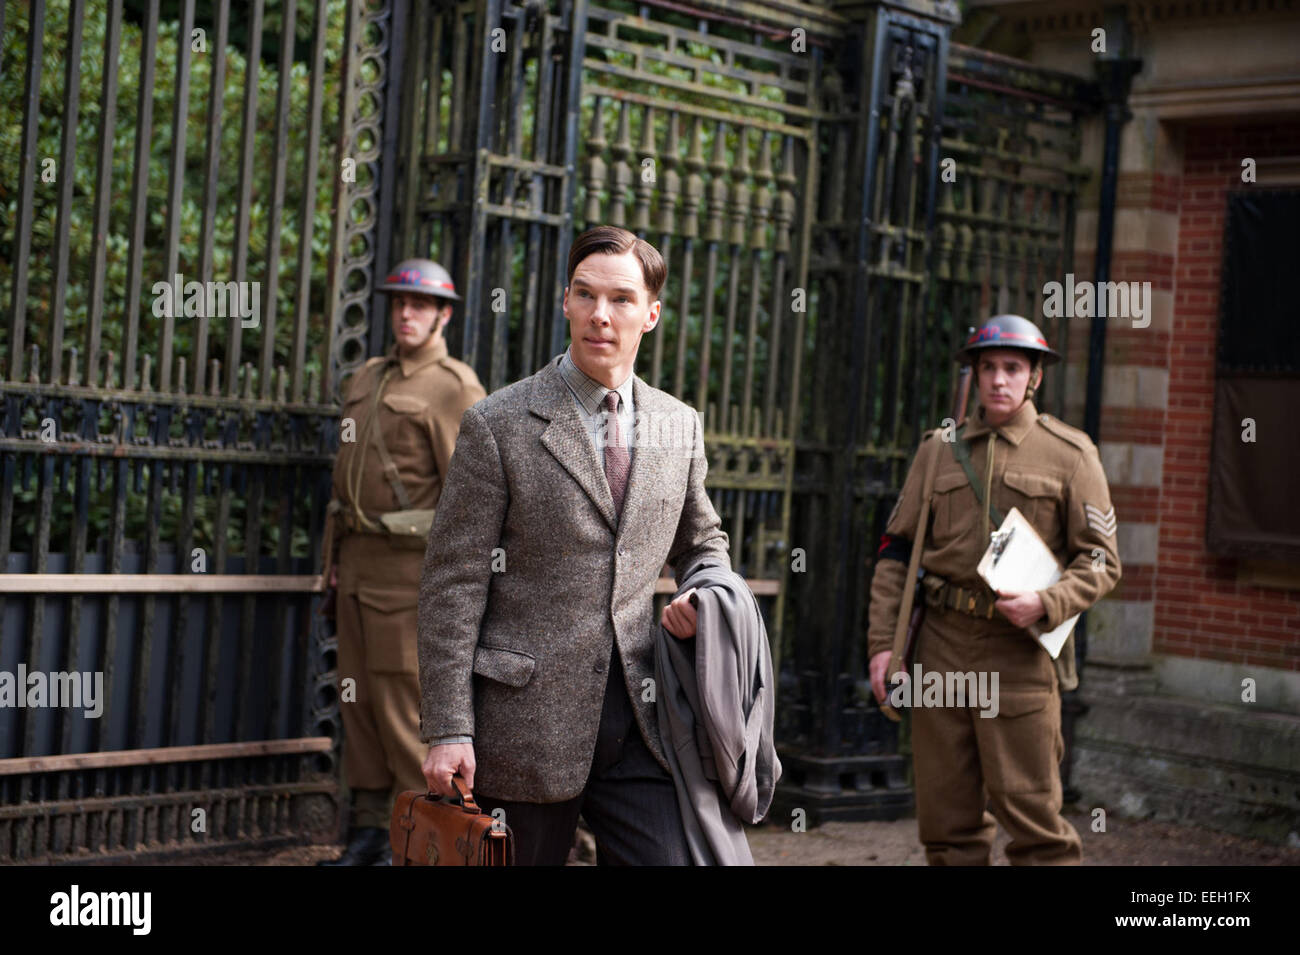 The Imitation Game is a 2014 historical thriller film about British mathematician, logician, cryptanalyst and pioneering computer scientist Alan Turing. Turing was a key figure in cracking Nazi Germany's naval Enigma code which helped the Allies win the Second World War, only to later be criminally prosecuted for his homosexuality. The film stars Benedict Cumberbatch as Turing, and is directed by Morten Tyldum. Stock Photo